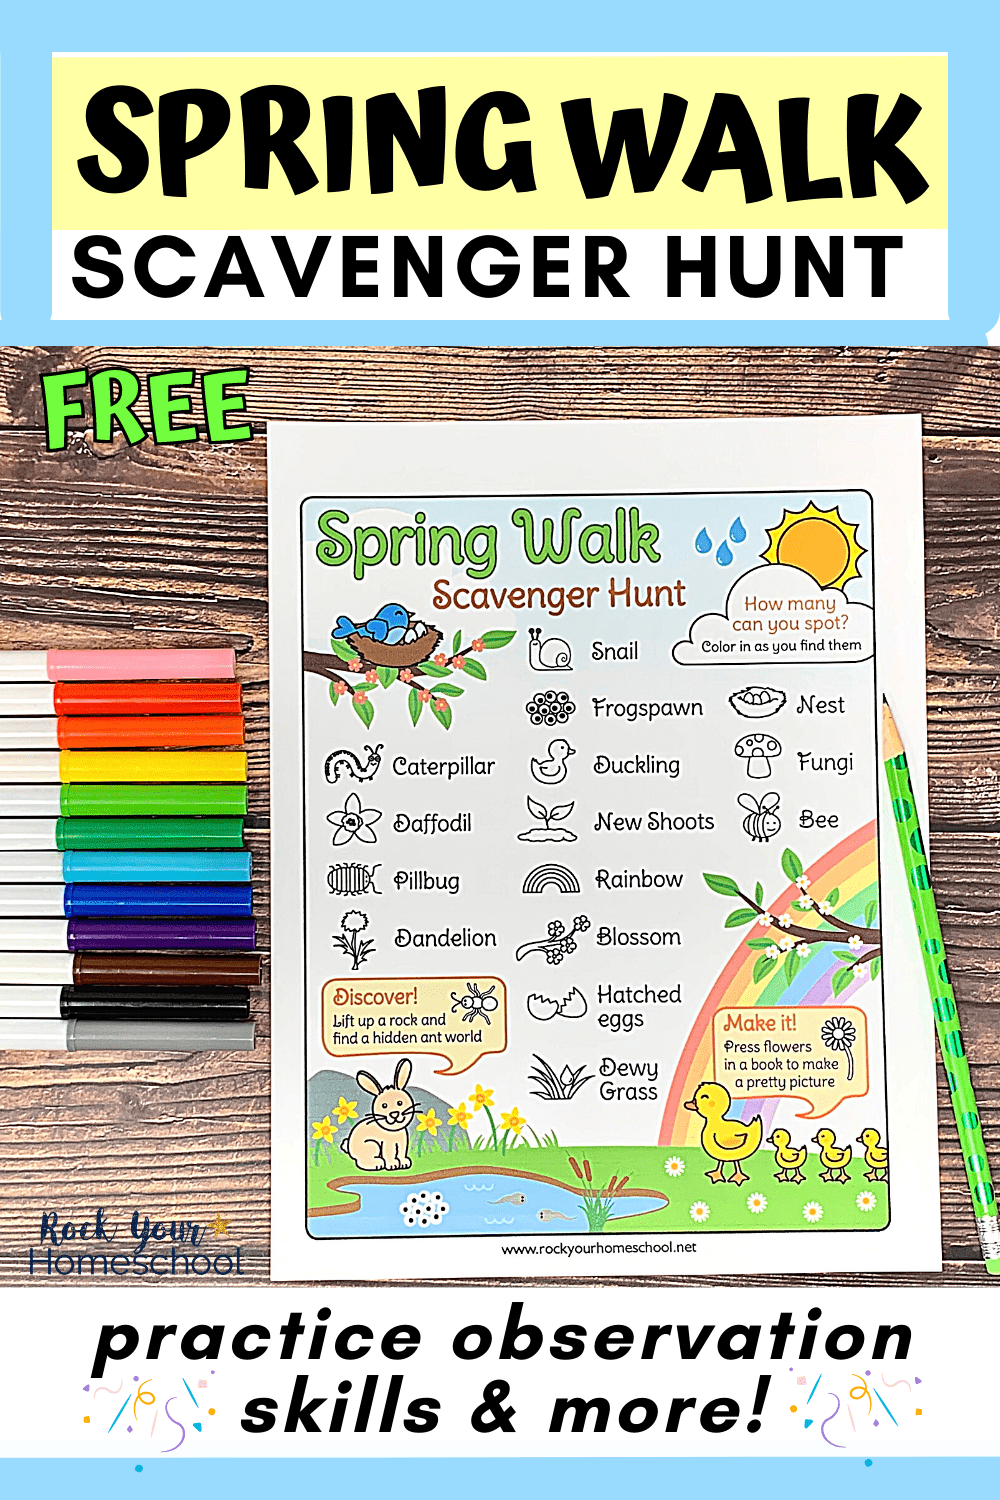 Spring Walk Scavenger Hunt for Outstanding Outdoor Fun (Free Printable)